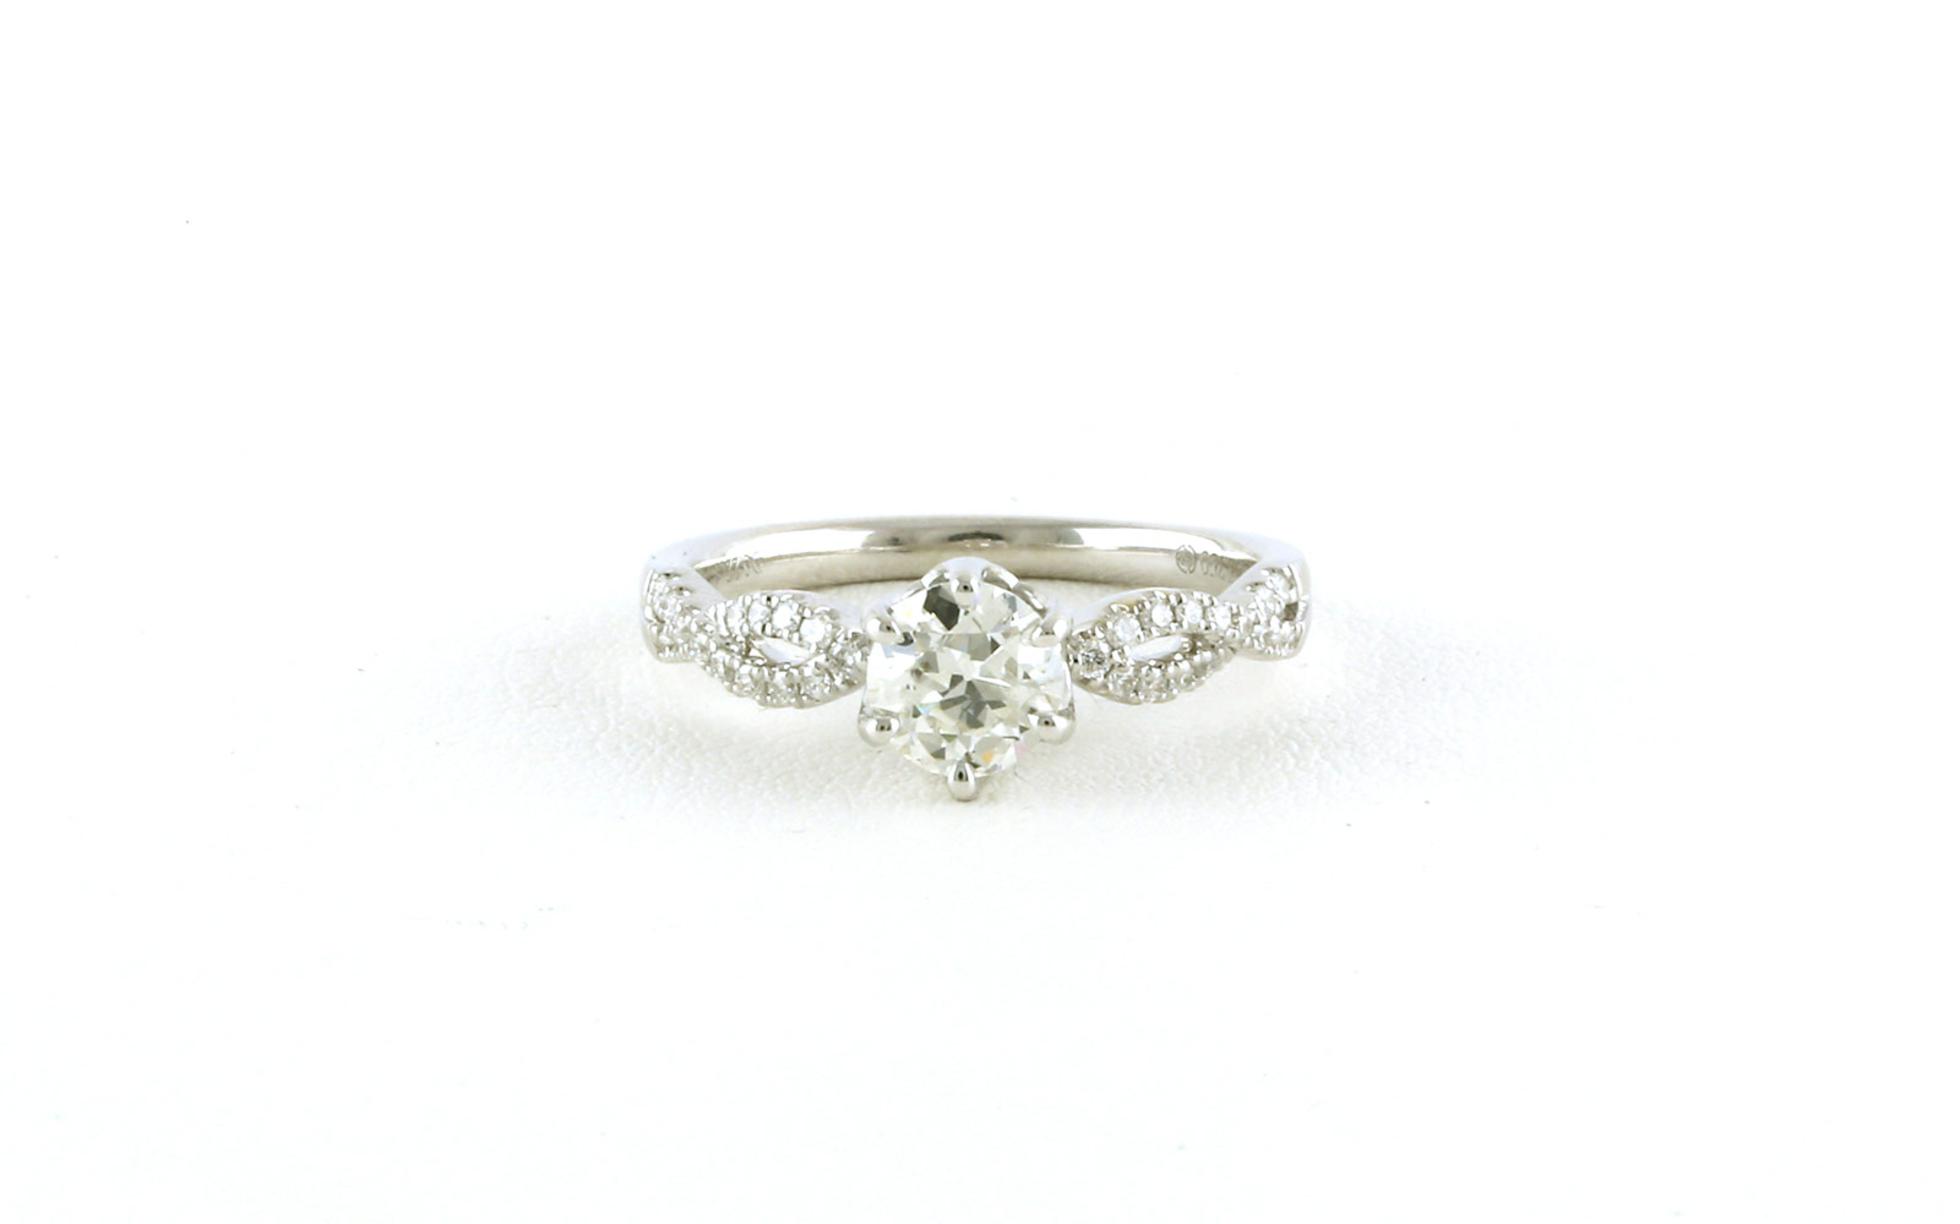 Woven Design Diamond Engagement Ring in White Gold (0.93cts TWT)